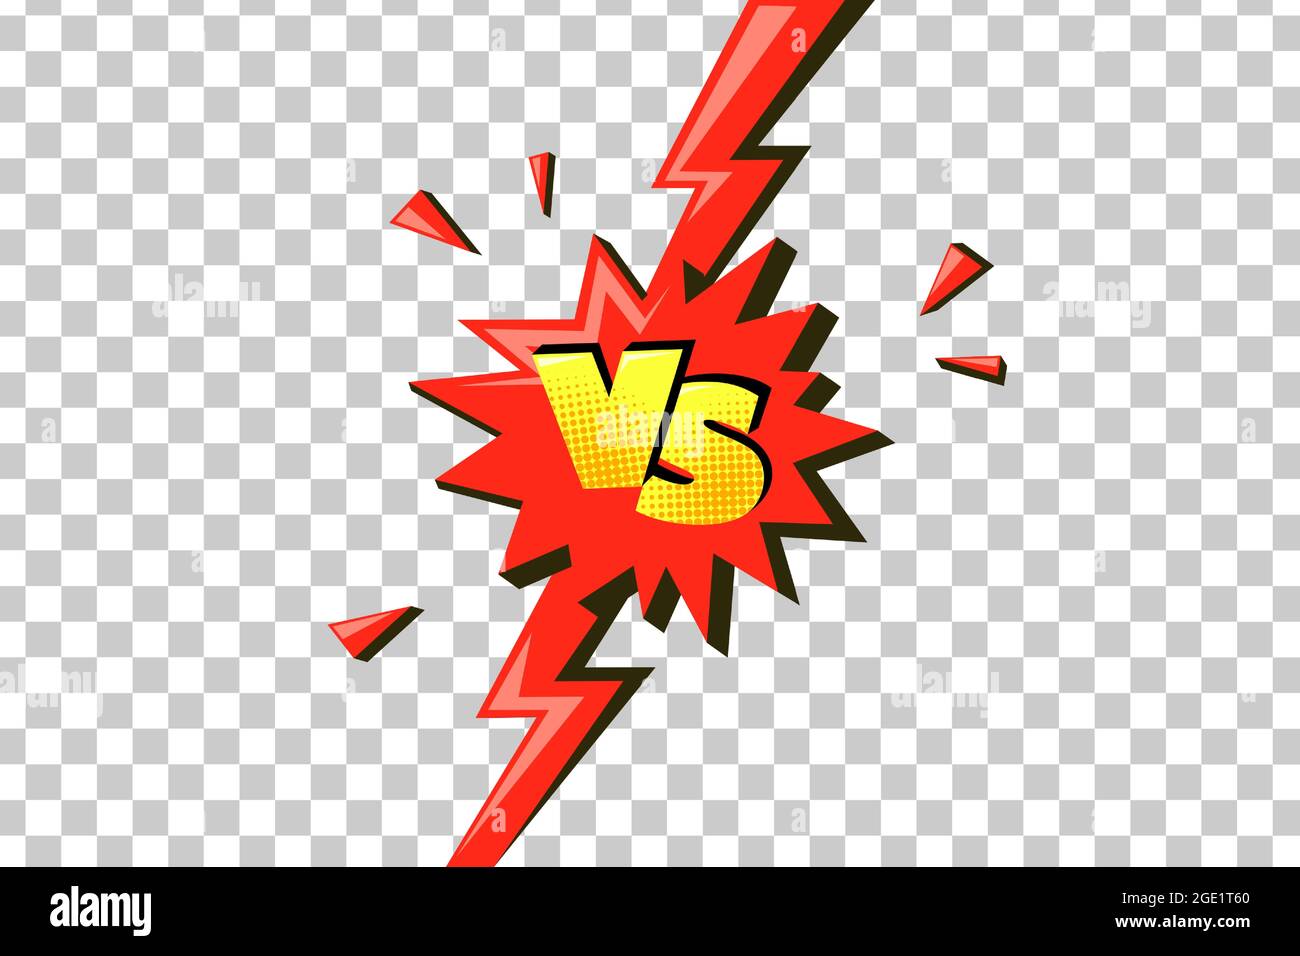 Red lightning with versus sign. Comic challenge symbol with vs letters. Vector illustration isolated in transparent background Stock Vector